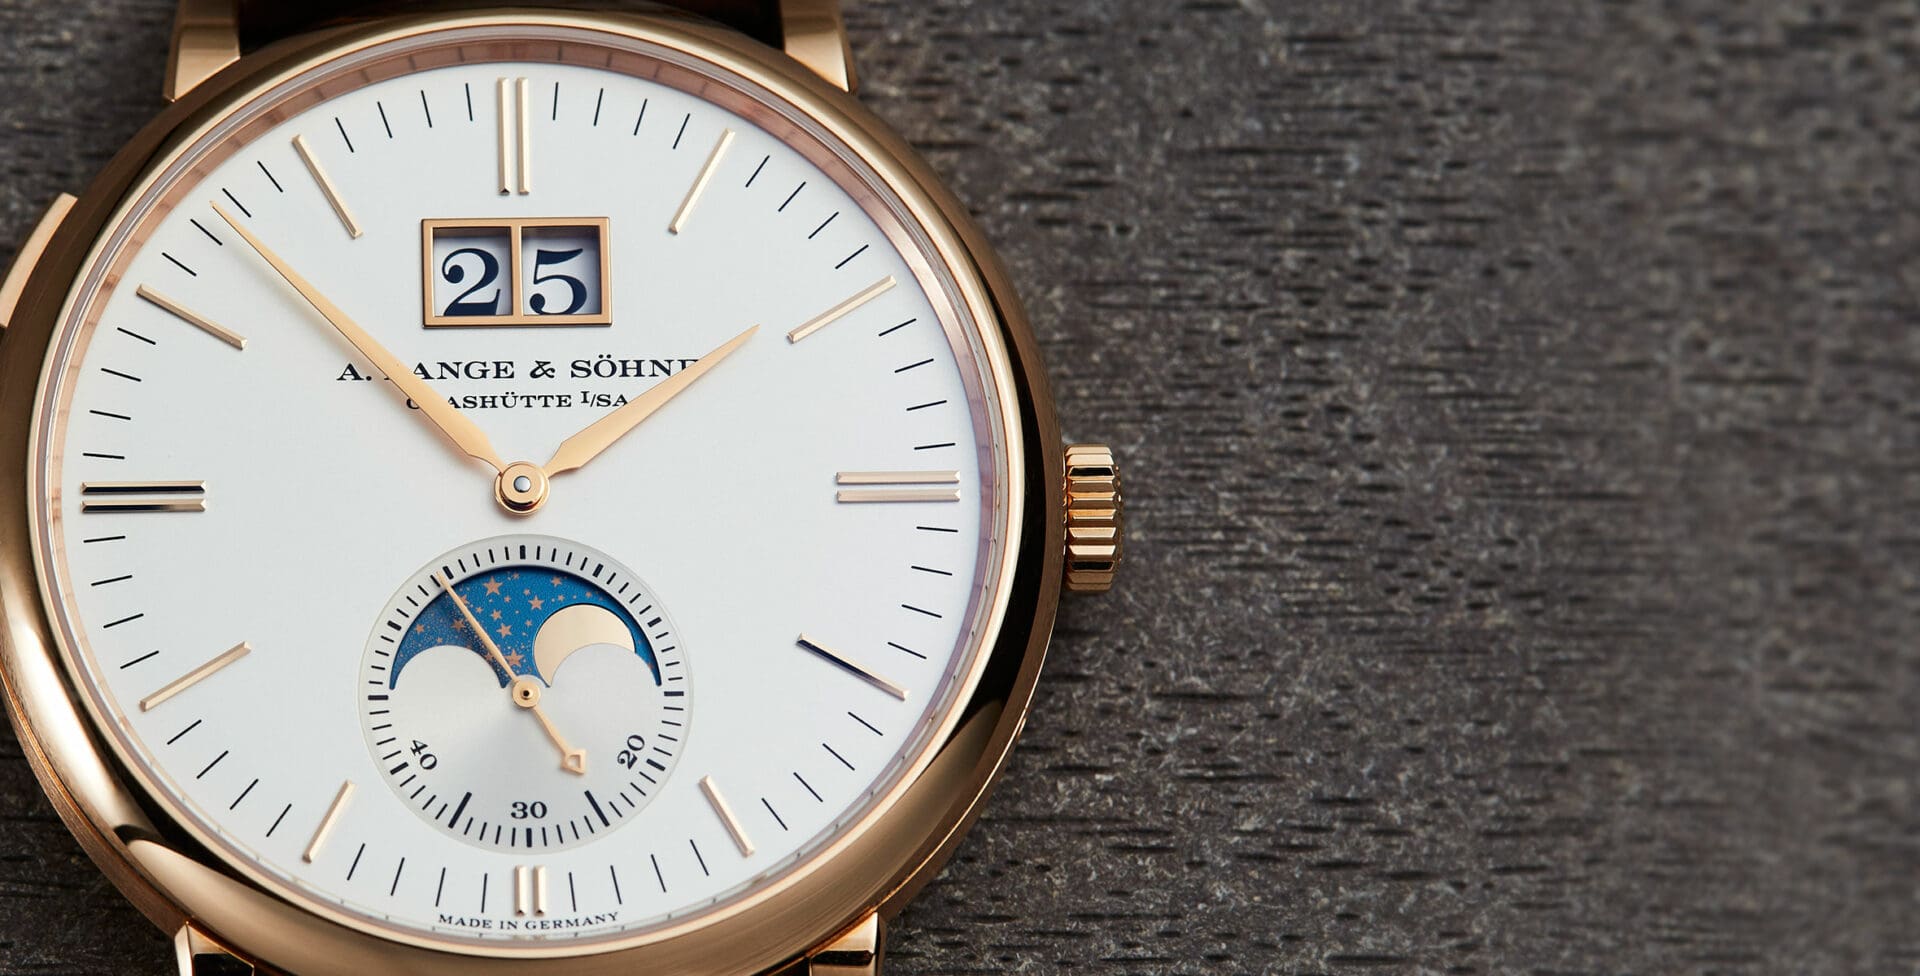 HANDS-ON: The moonlit symphony that is the A. Lange & Söhne Saxonia Moonphase